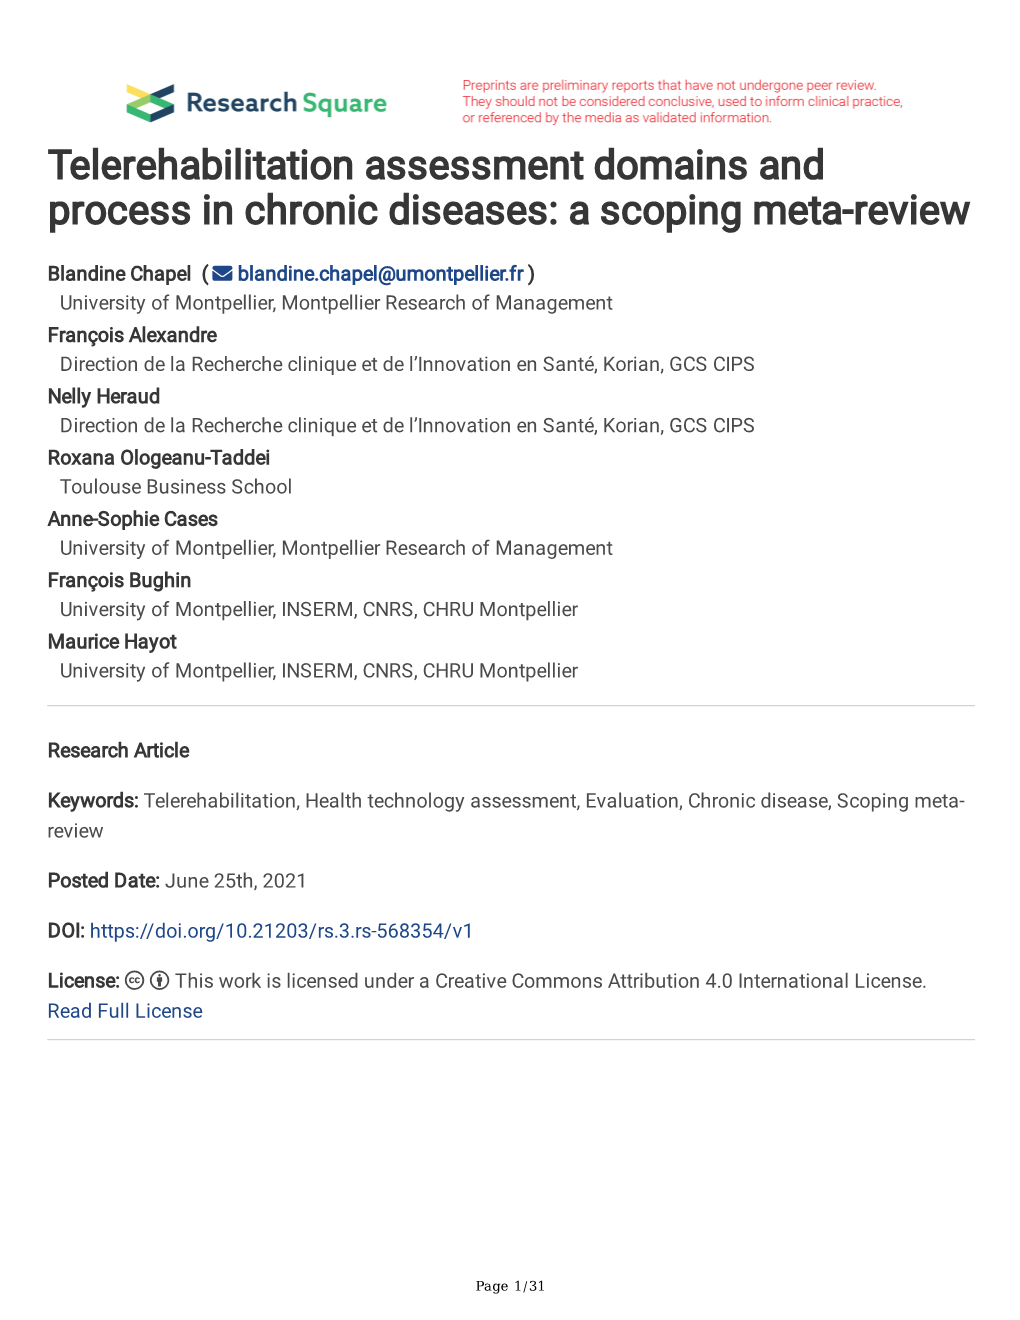 Telerehabilitation Assessment Domains and Process in Chronic Diseases: a Scoping Meta-Review